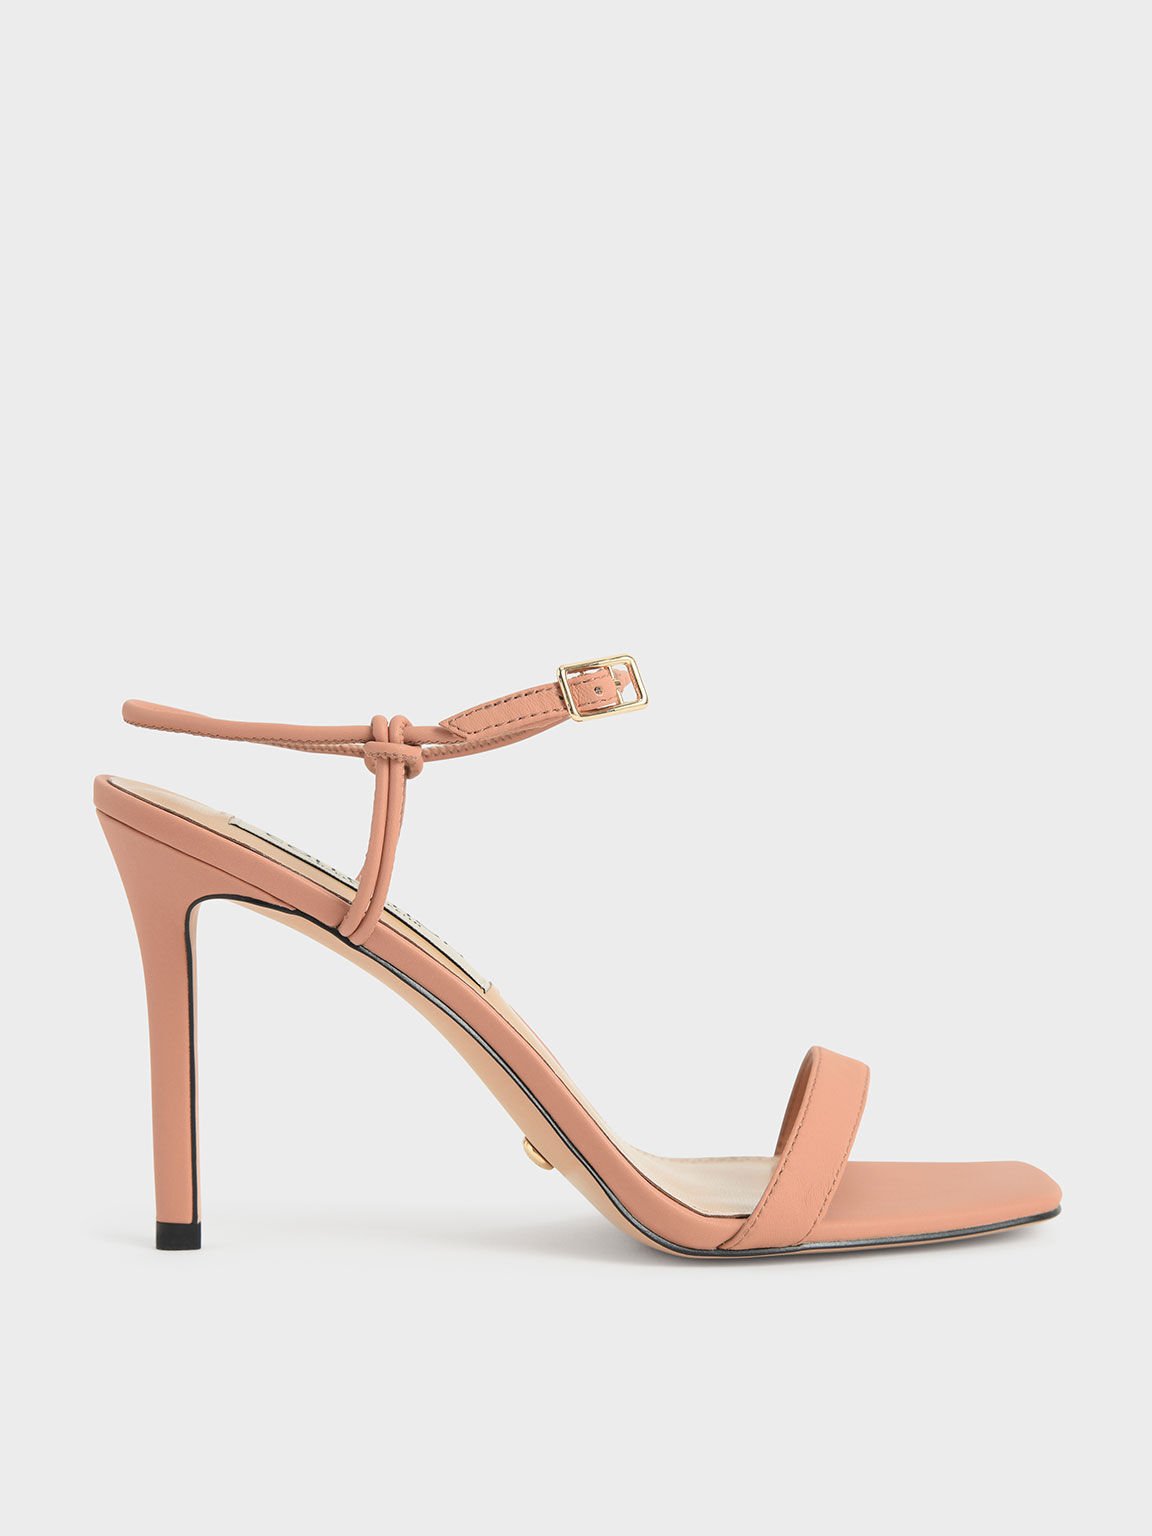 Leather Knotted Heeled Sandals, Tan, hi-res